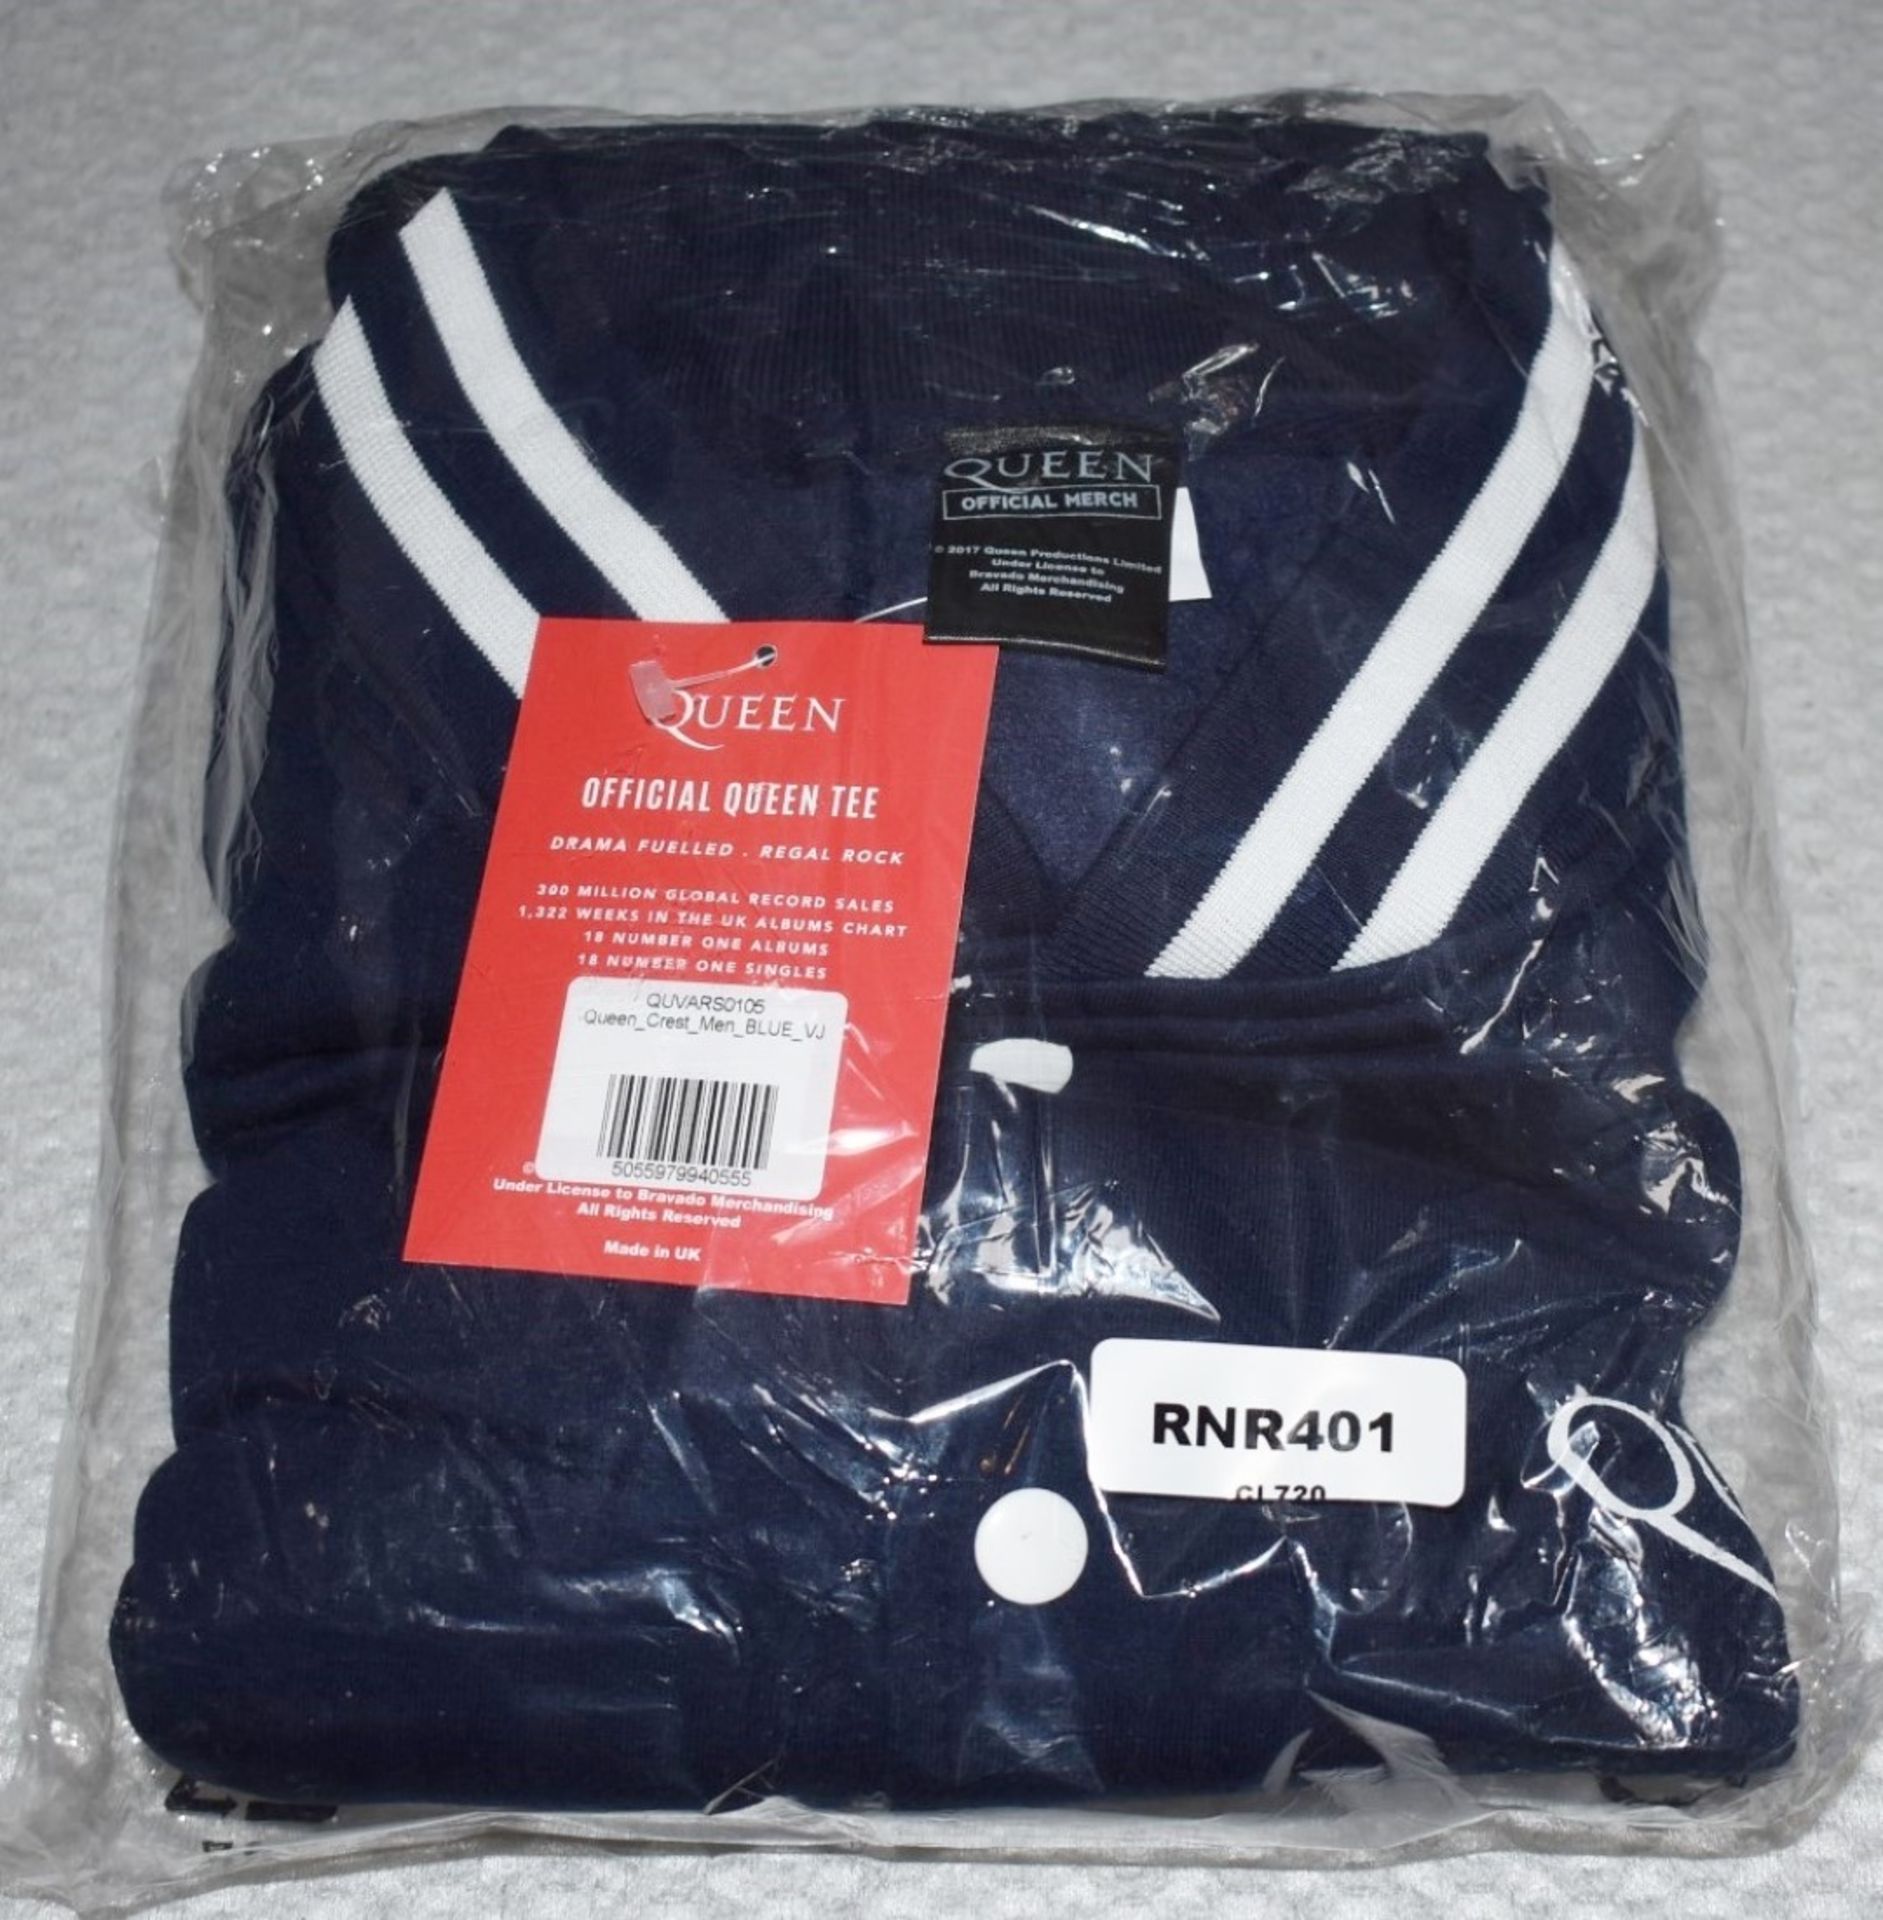 1 x Queen Men's Baseball Jacket in Blue With Crest Design Motif - Size: XXL - RRP £55 - Image 2 of 5